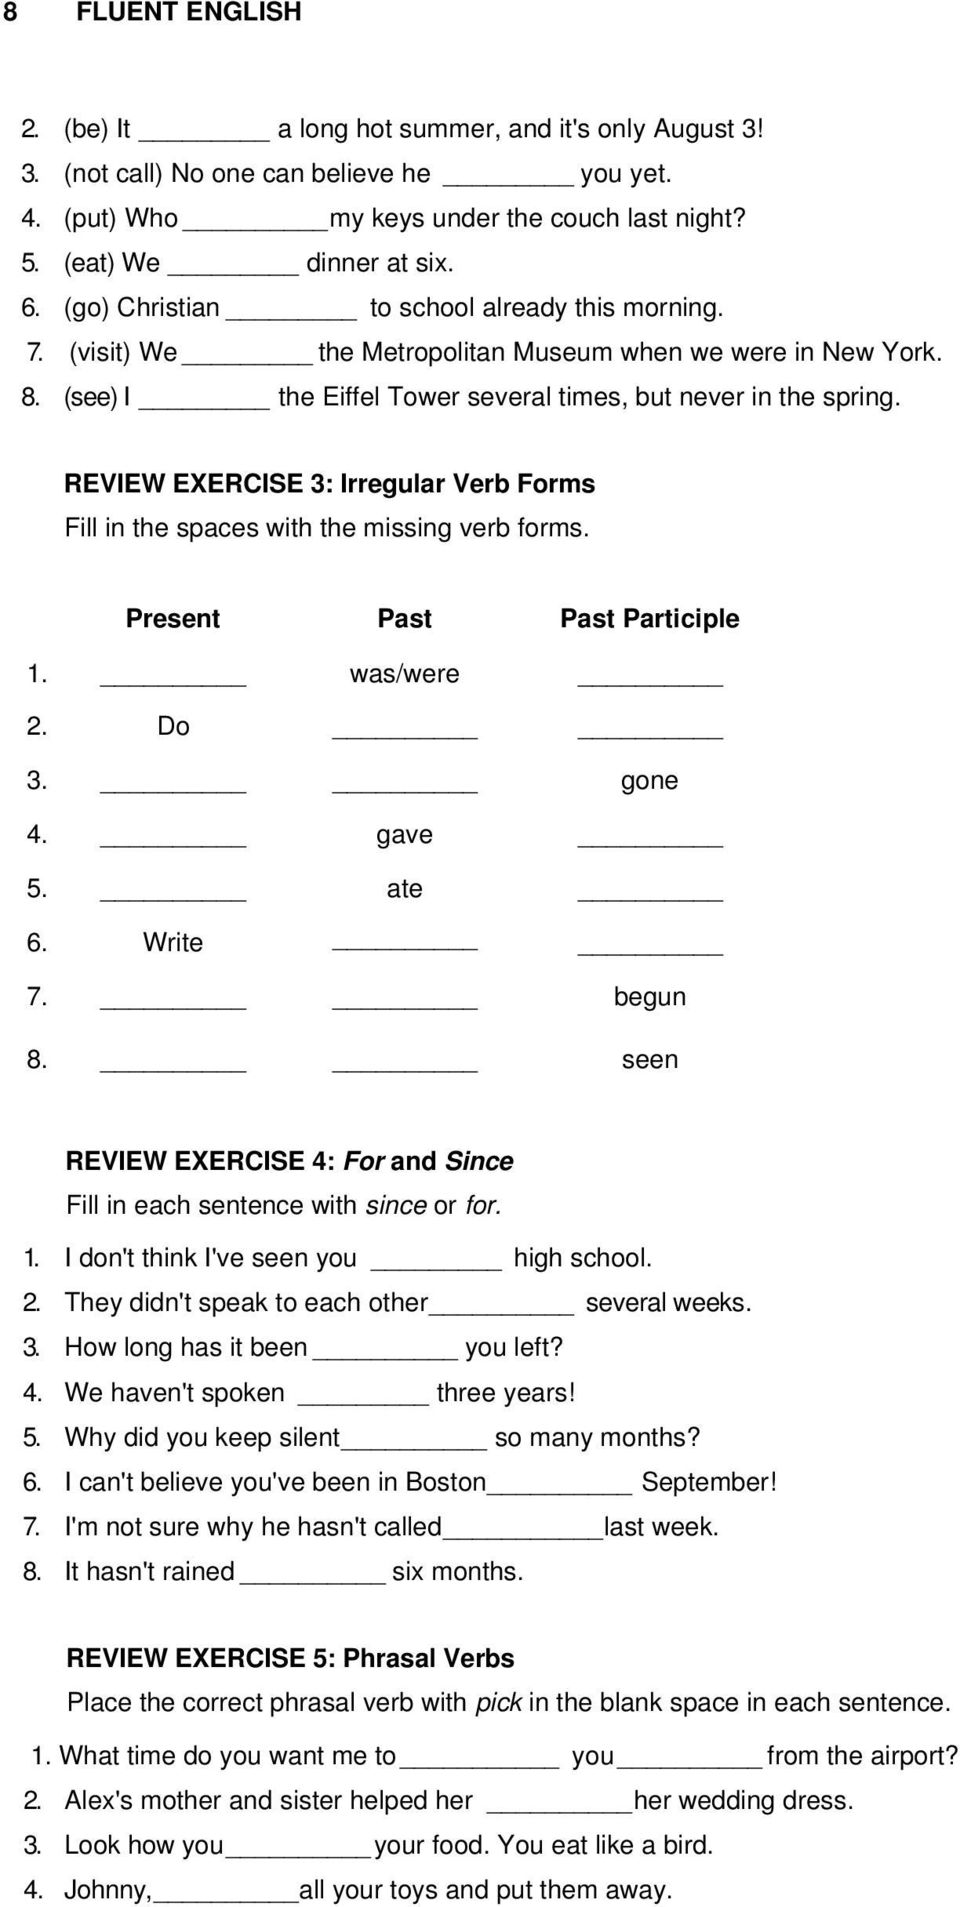 REVIEW EXERCISE 3: Irregular Verb Forms Fill in the spaces with the missing verb forms. Present Past Past Participle 1. was/were 2. Do 3. gone 4. gave 5. ate 6. Write 7. begun 8.